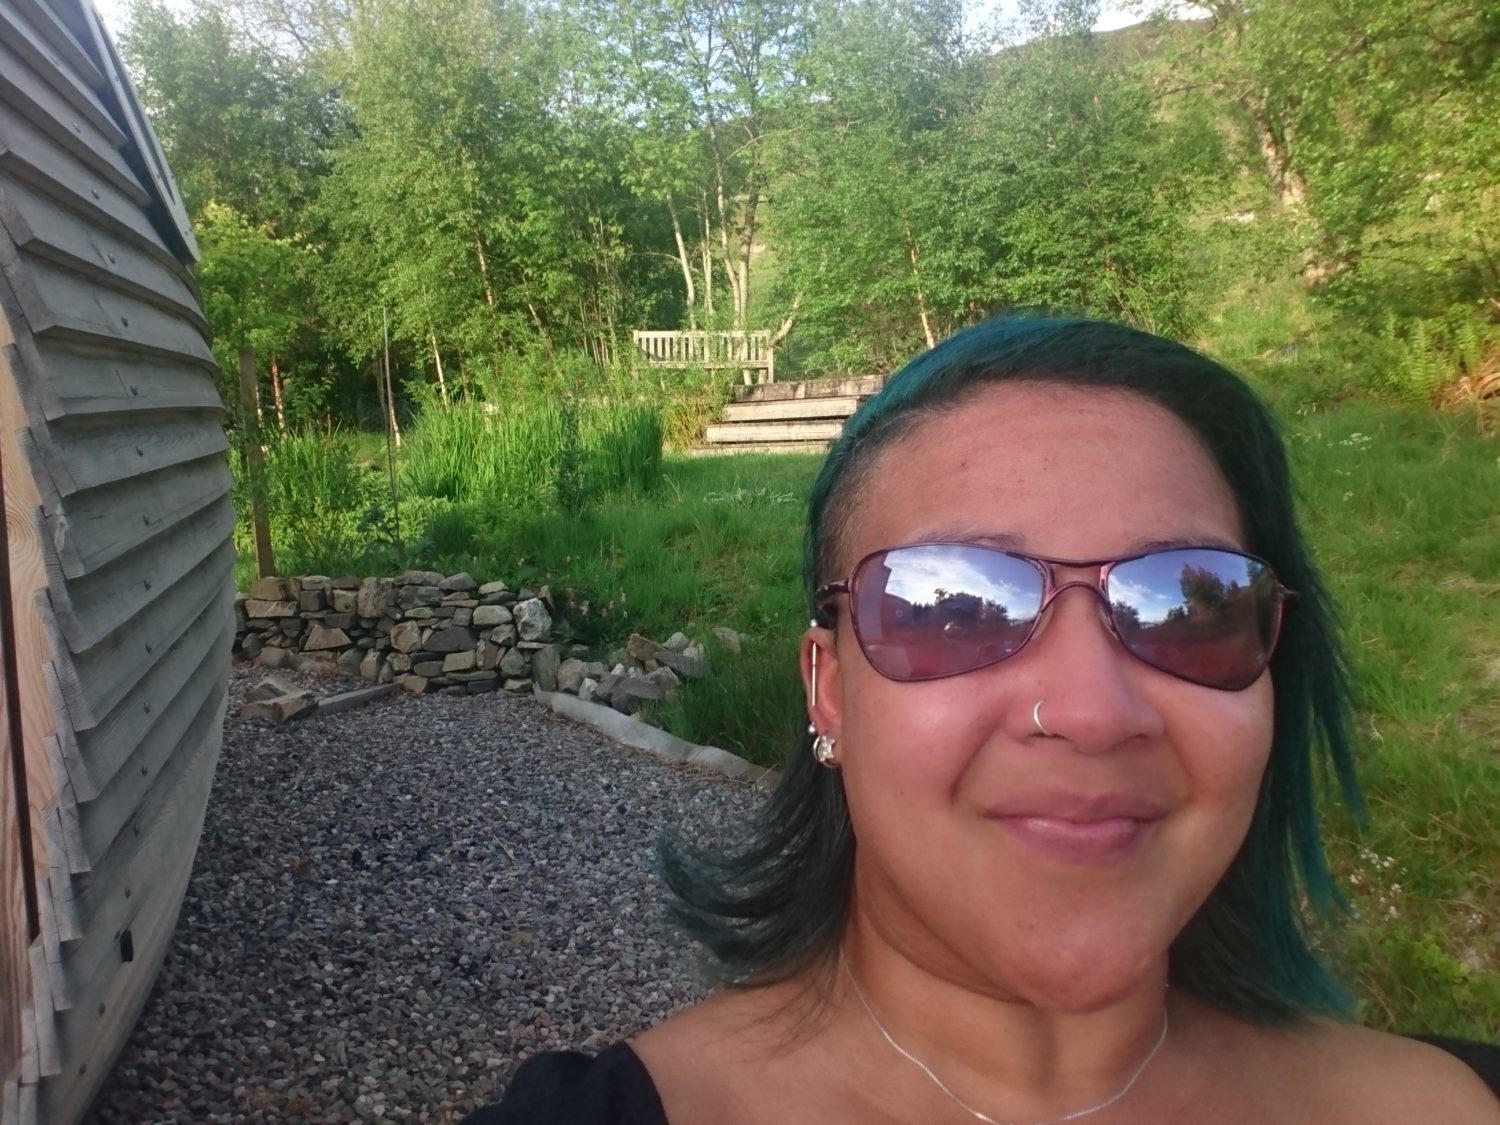 Outside the Loch Tay glamping Armadilla in Scotland